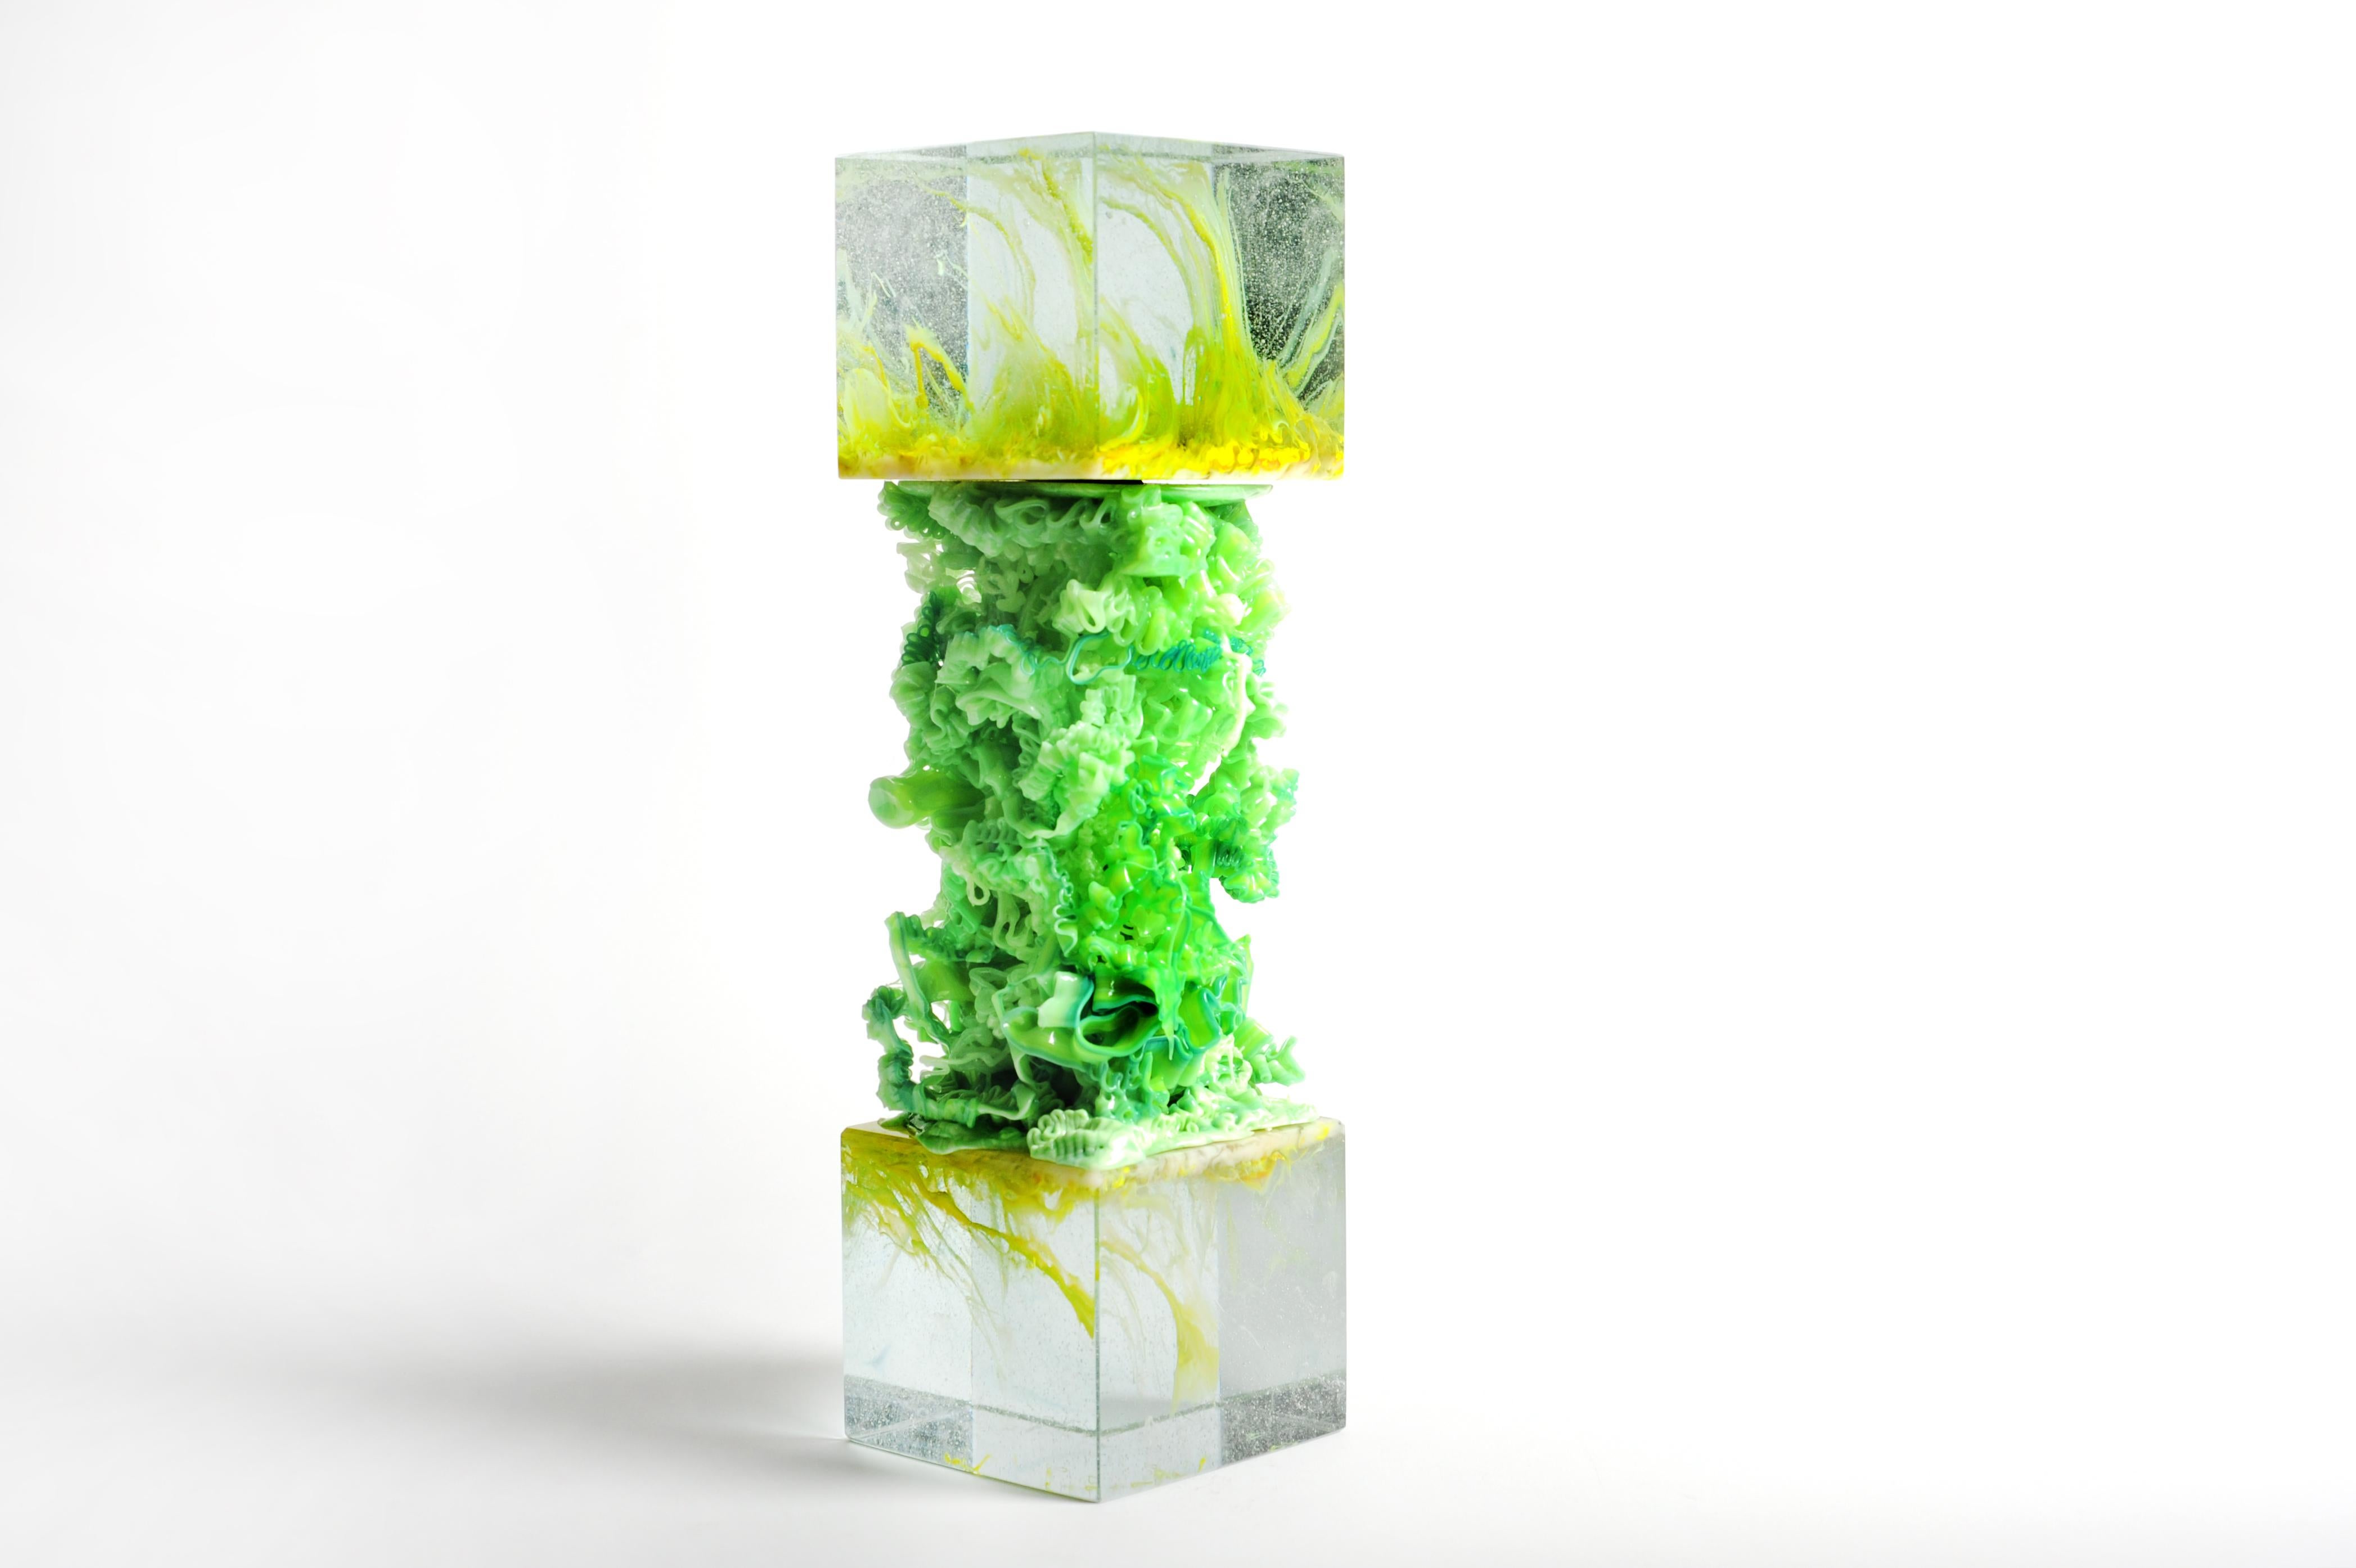 A collaboration between Studio Orfeo Quagliata and Tony Wurman of Wunderwurks Design. 

An unprecedented marriage of Orfeo's spectacular glass work, an obsessive process created by boiling high quality recycled crystal with color to create vibrant